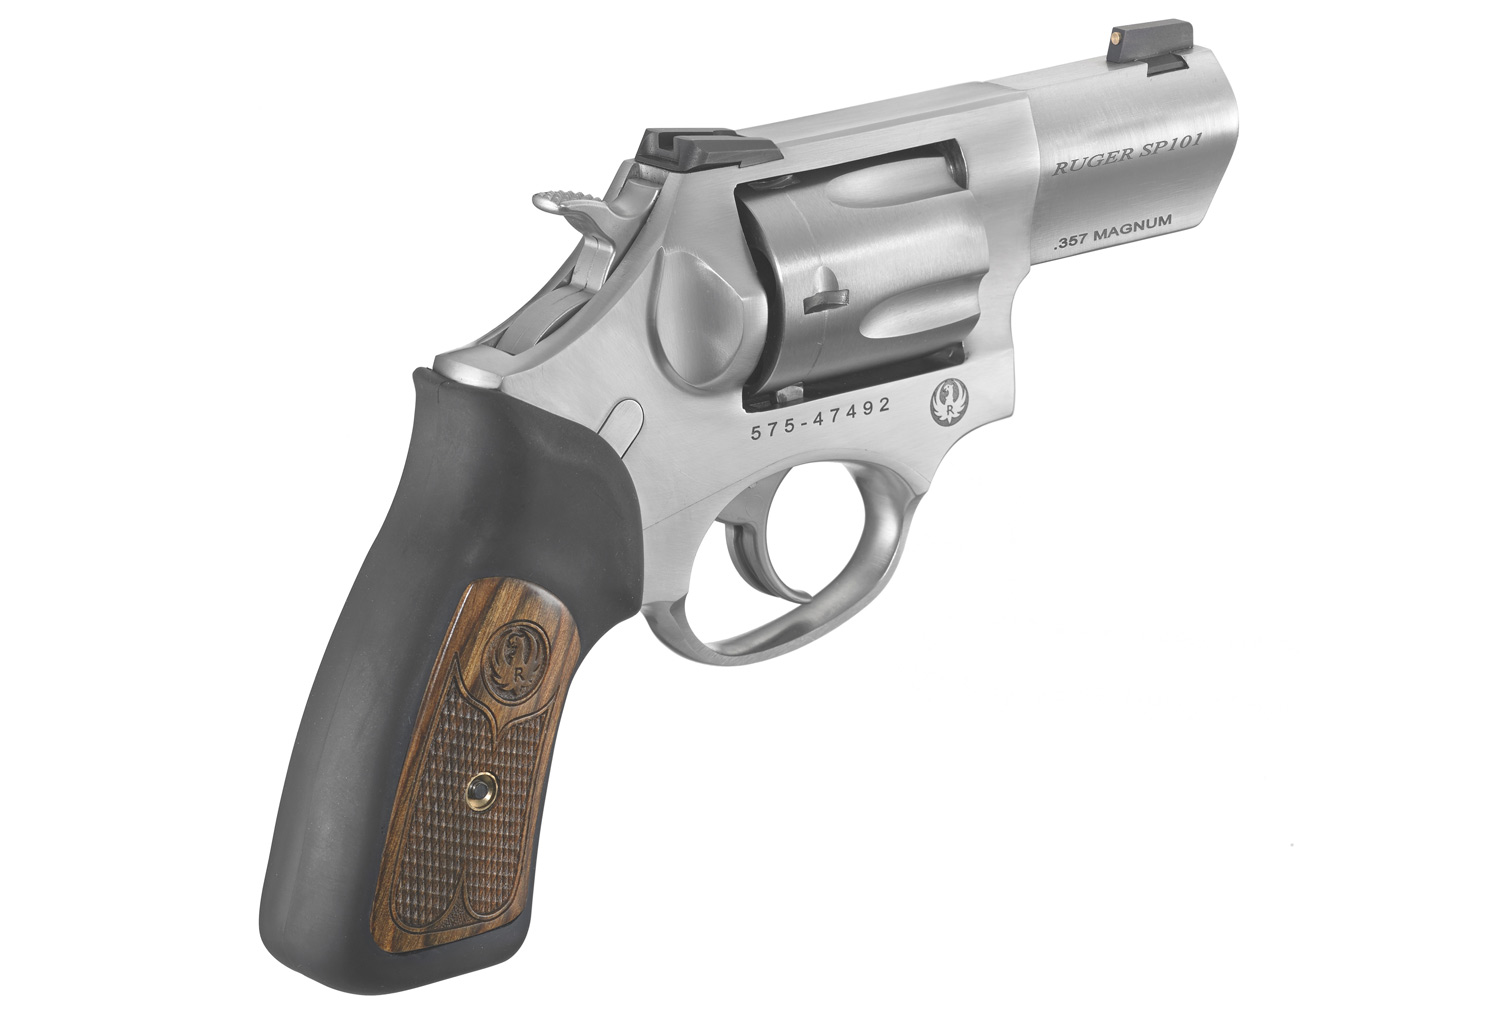 Buying a concealed carry revolver